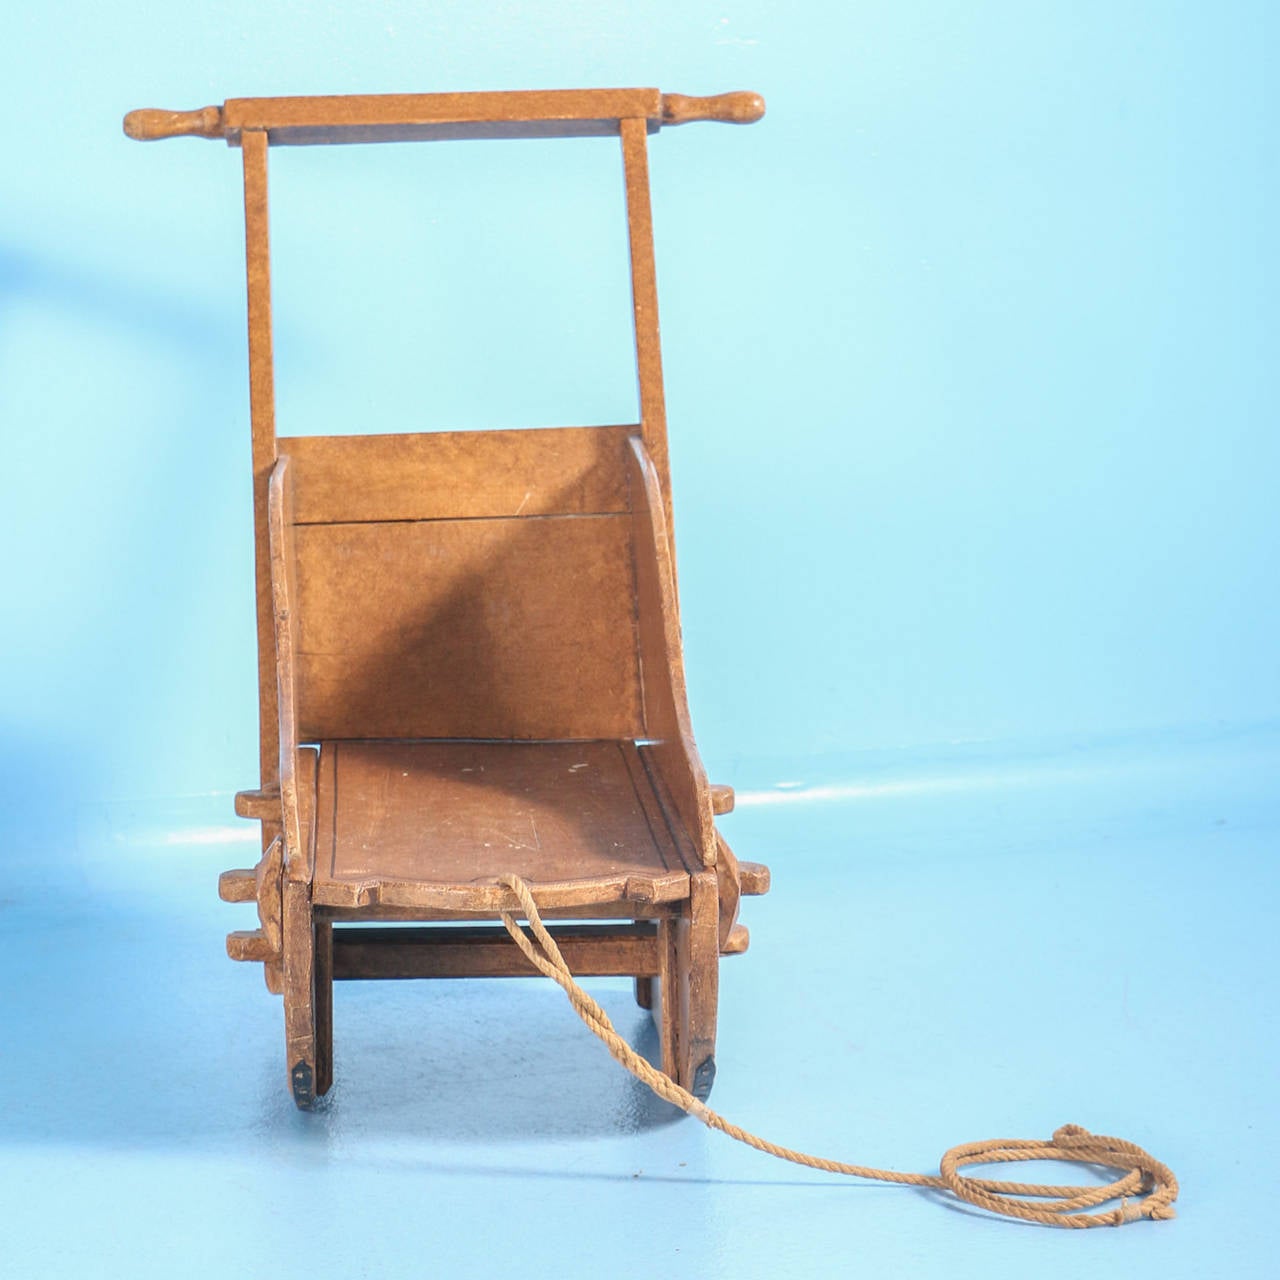 This delightful wooden sled was built for a child. Note the small scale and rope still attached to the front for pulling and tall handle in the back to push.